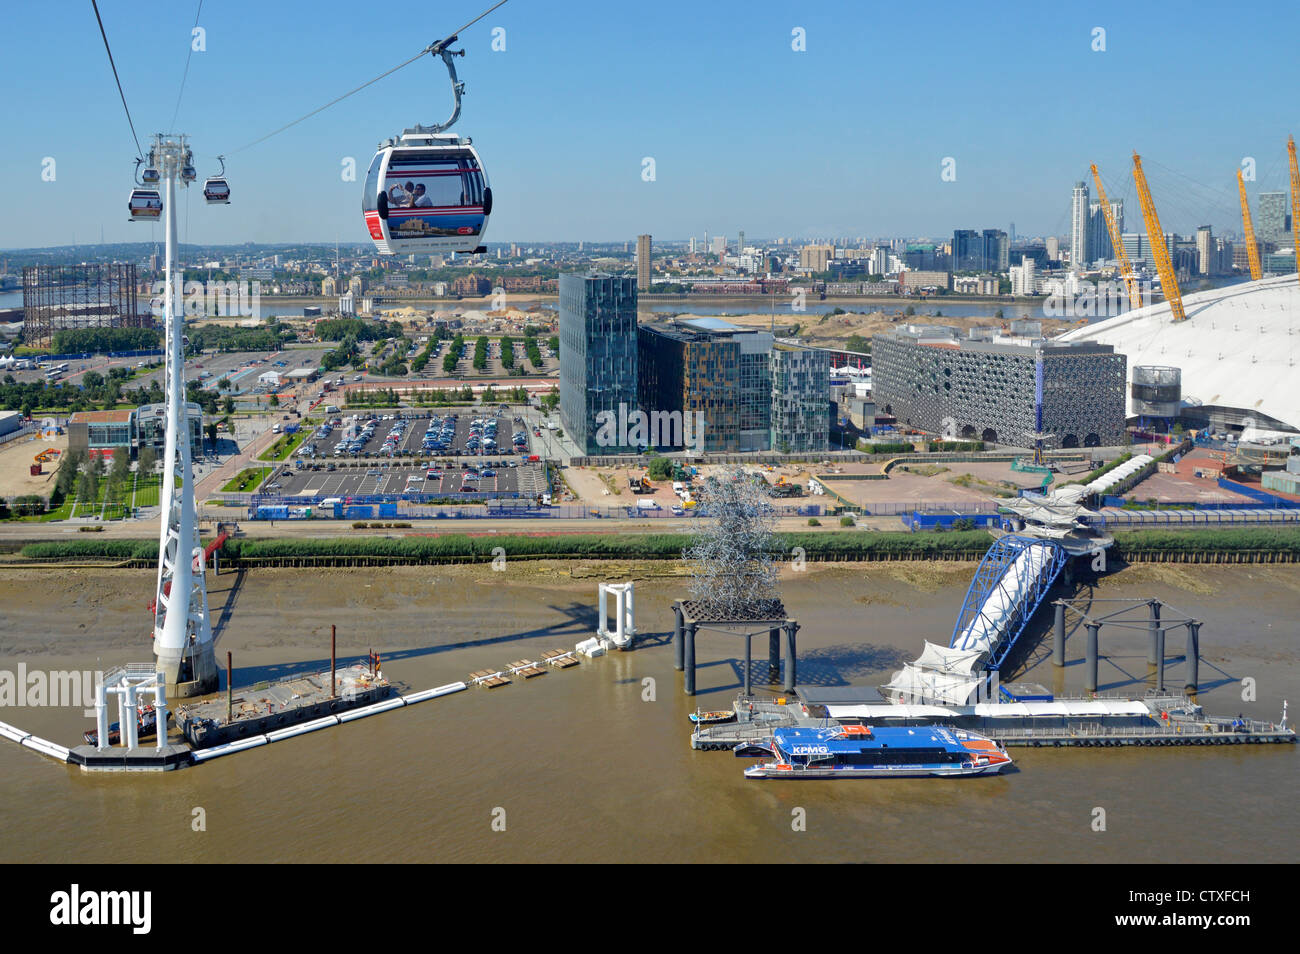 Aerial view of North Greenwich Pier & peninsula with moored Thames Clipper boat all adjacent to the o2 arena 02 millenium dome Stock Photo